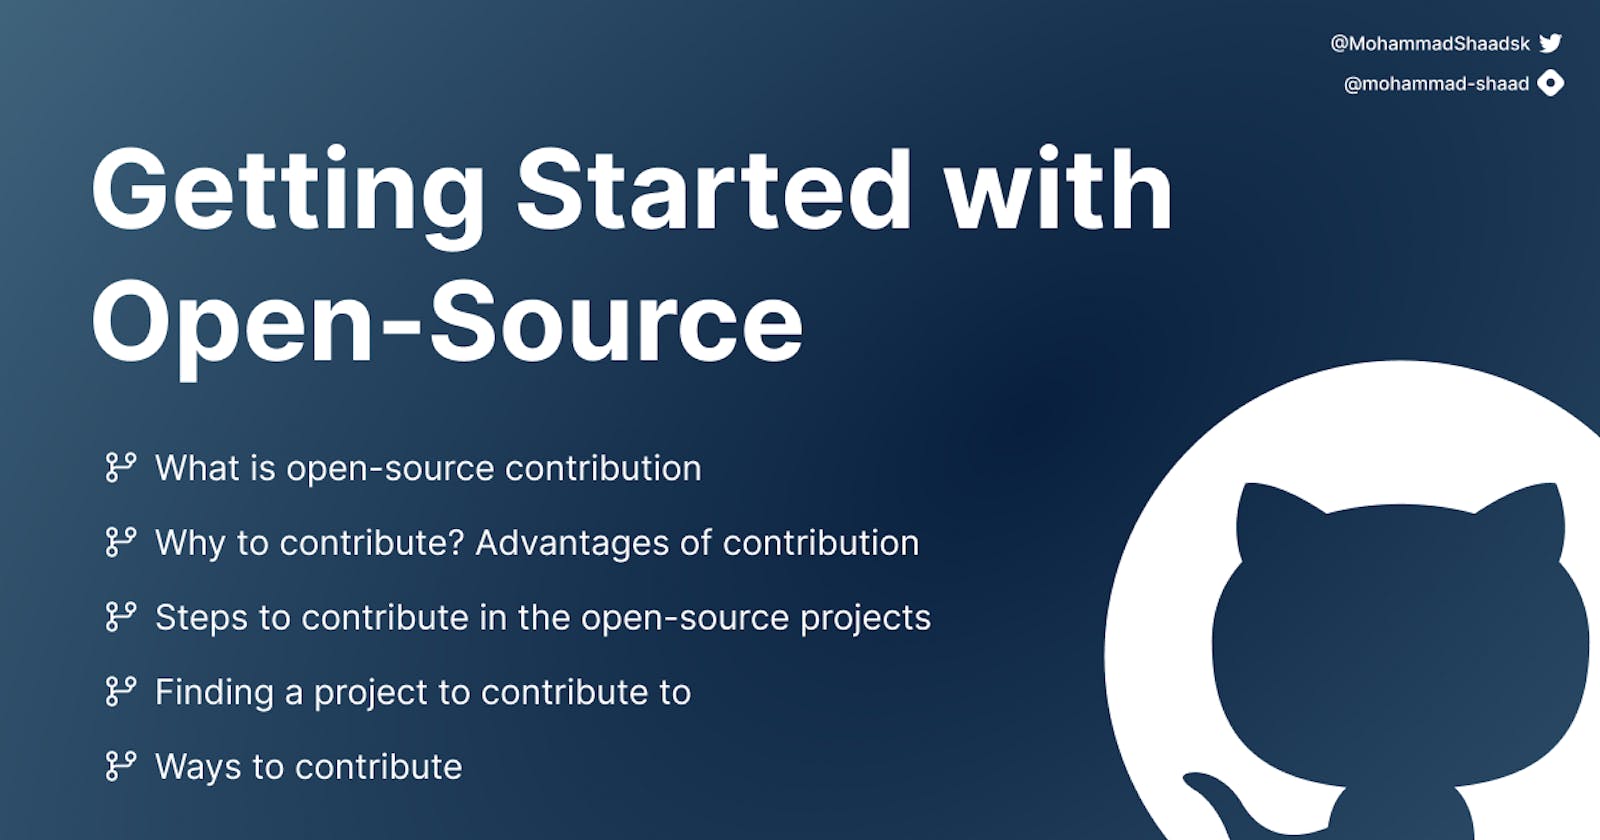 Getting Started with Open-Source